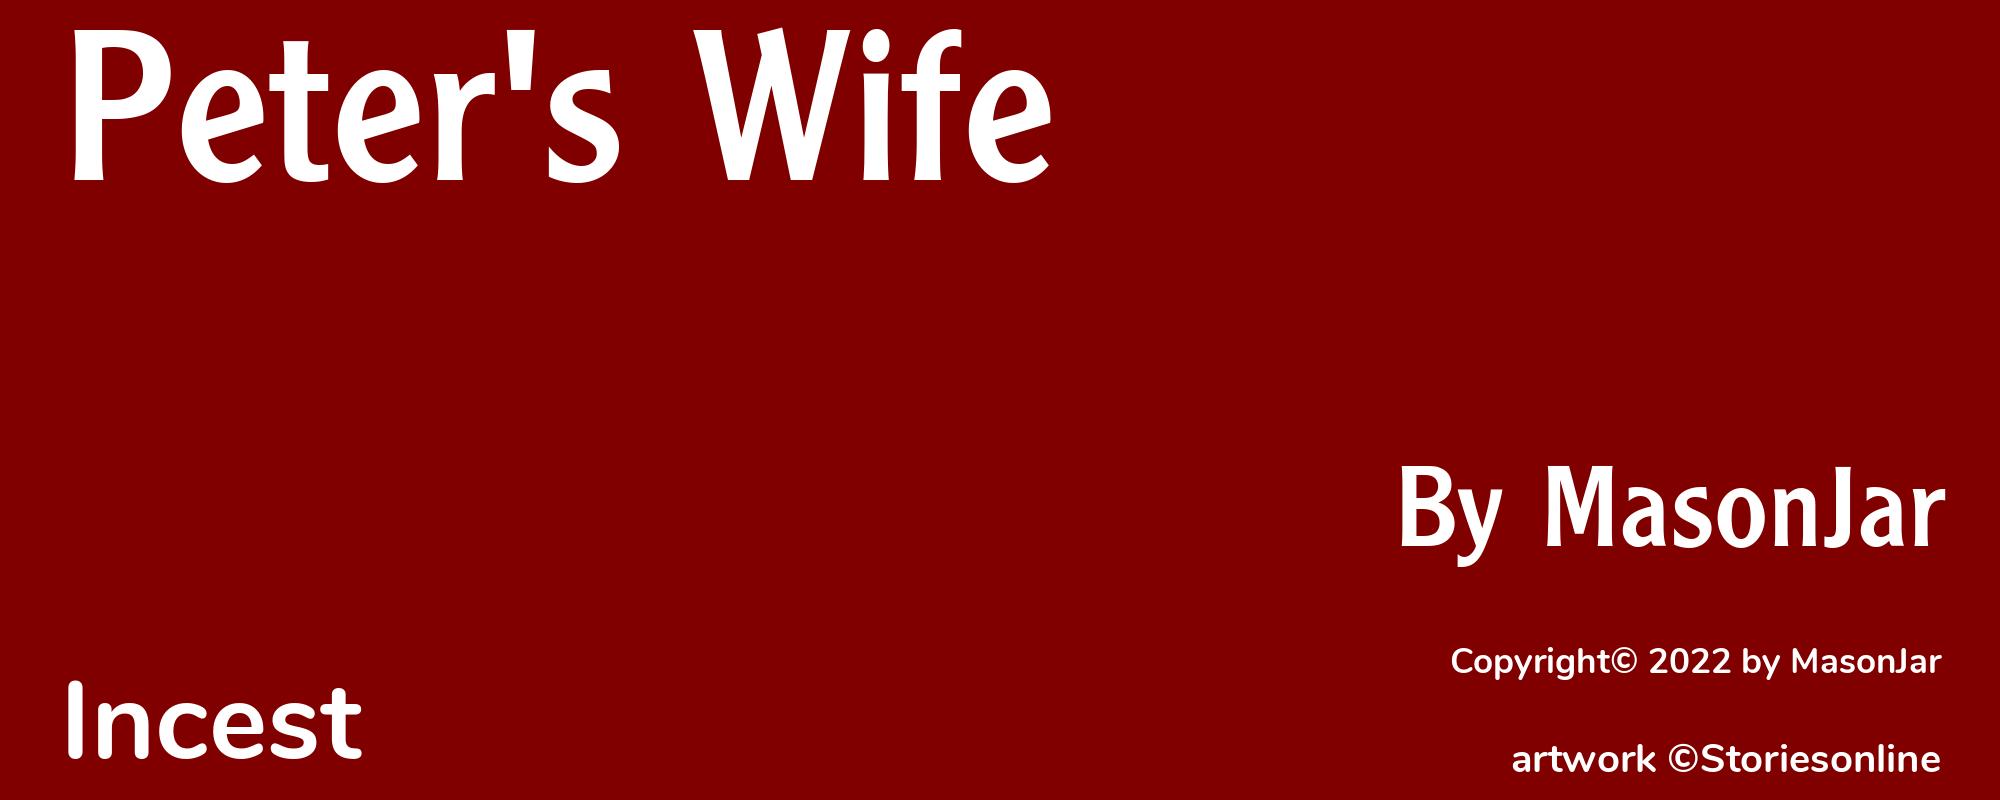 Peter's Wife - Cover